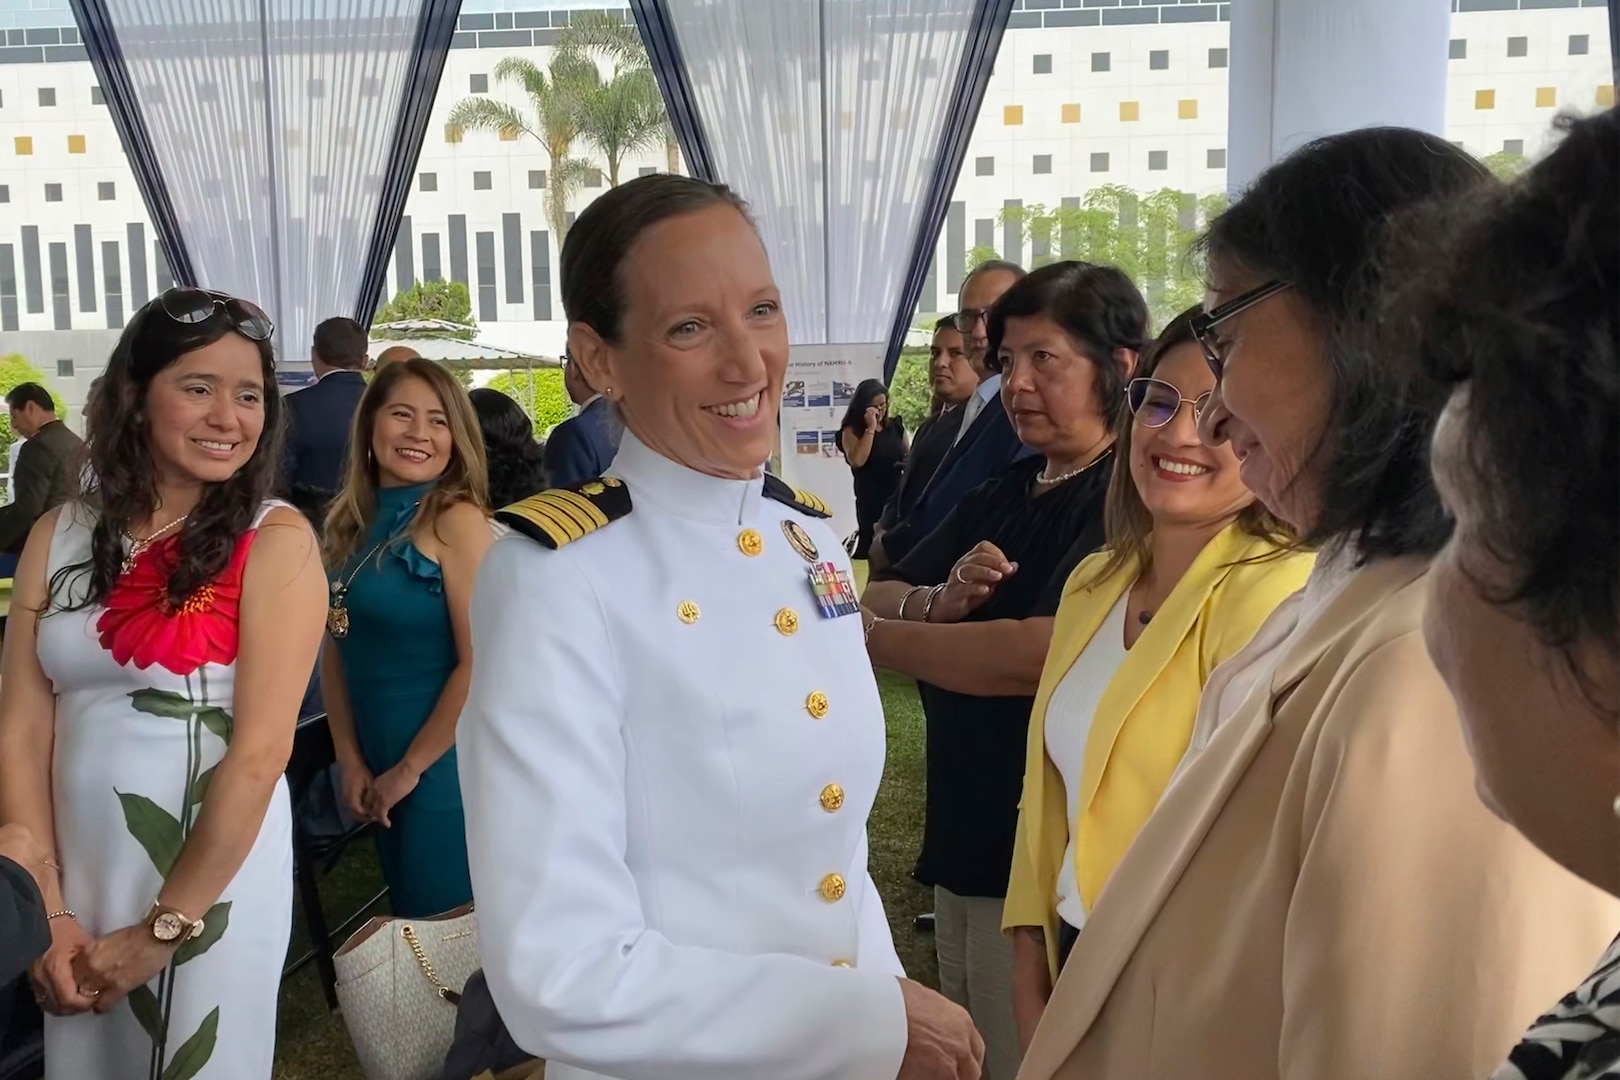 Capt. Franca Jones, commanding officer, Naval Medical Research Unit (NAMRU)-6, greets attendees at the command’s 40th anniversary celebration at the U.S. Embassy Campus. NAMRU-6 hosted several visitors and guests from the U.S. and Peru at the event, to include U.S. Ambassador to Peru Lisa Kenna, Rear Adm. Jorge Enrique Andaluz Echevarría, Surgeon General of the Peruvian Navy, Rear Adm. Guido F. Valdes, commander, Naval Medical Forces Pacific and Capt. William Denniston, commander, Naval Medical Research Center. Visitors provided remarks celebrating the history of the command and its ongoing mission. NAMRU-6, part of the Naval Medical Research & Development enterprise, supports Global Health Engagement through surveillance of a wide range of infectious diseases of military or public health significance, including dengue fever, malaria, diarrheal diseases, and sexually transmitted infections.